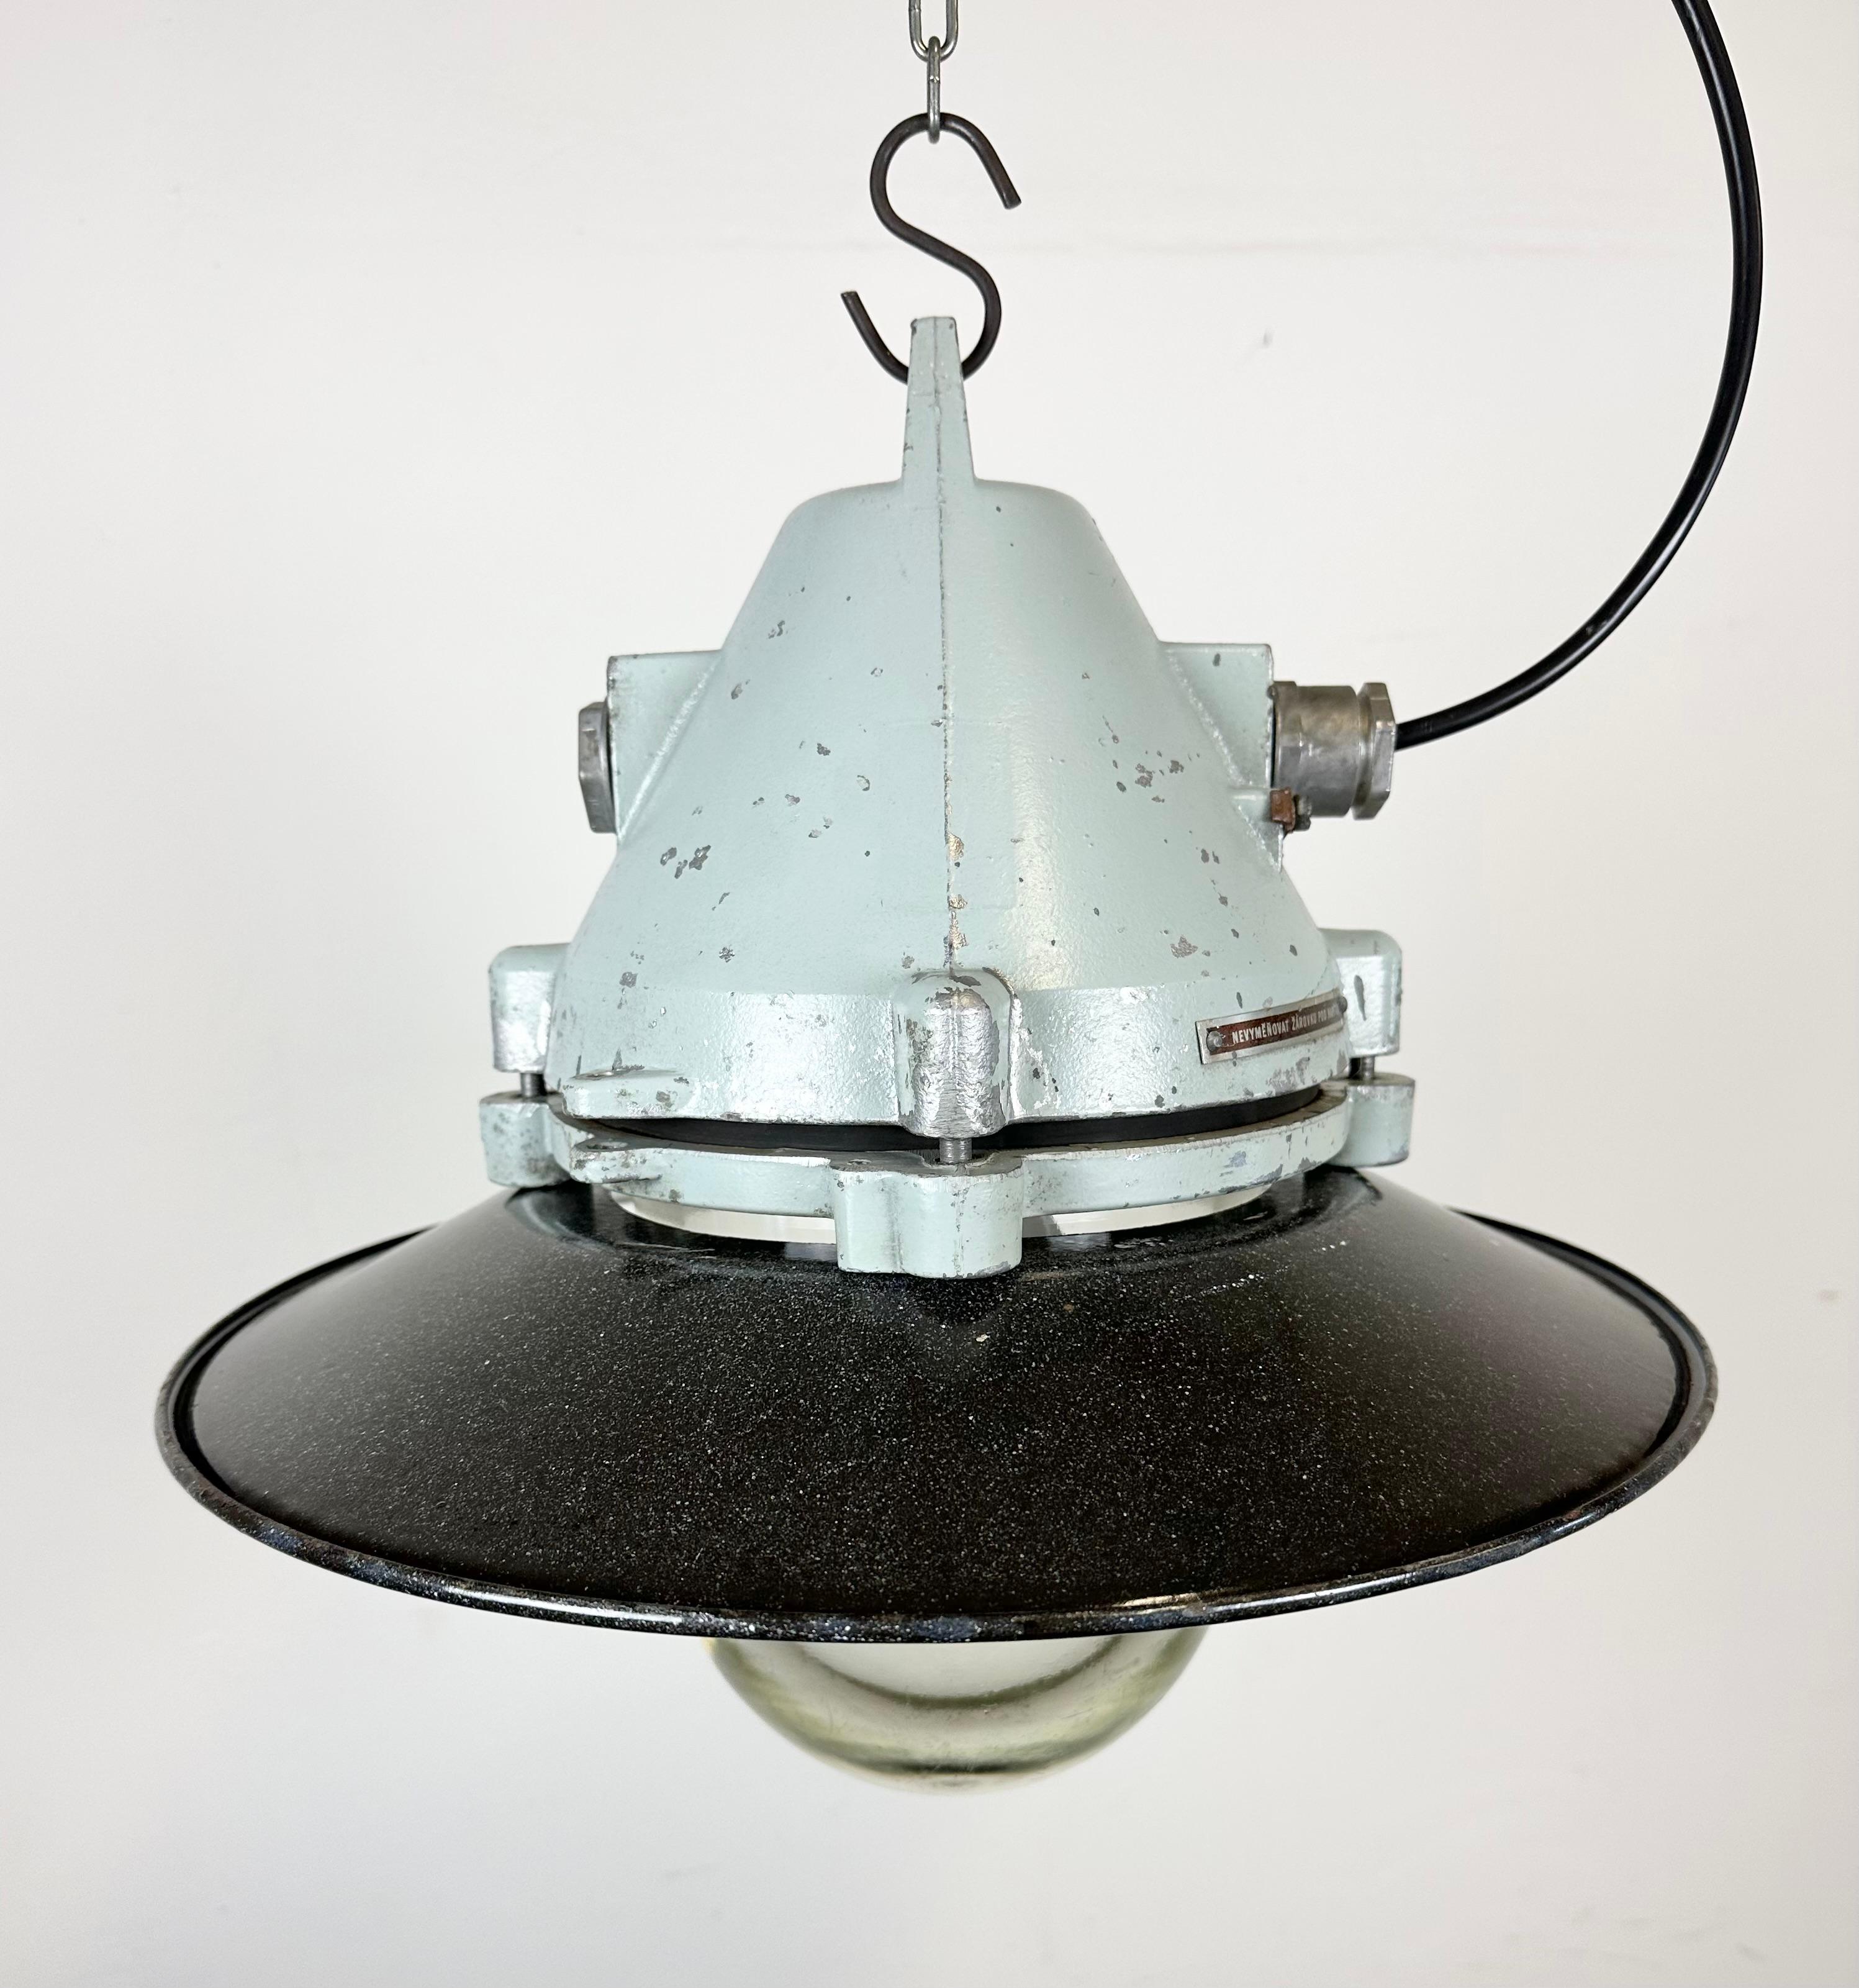 Grey Cast Aluminium Explosion Proof Lamp with Enameled Shade, 1970s For Sale 3